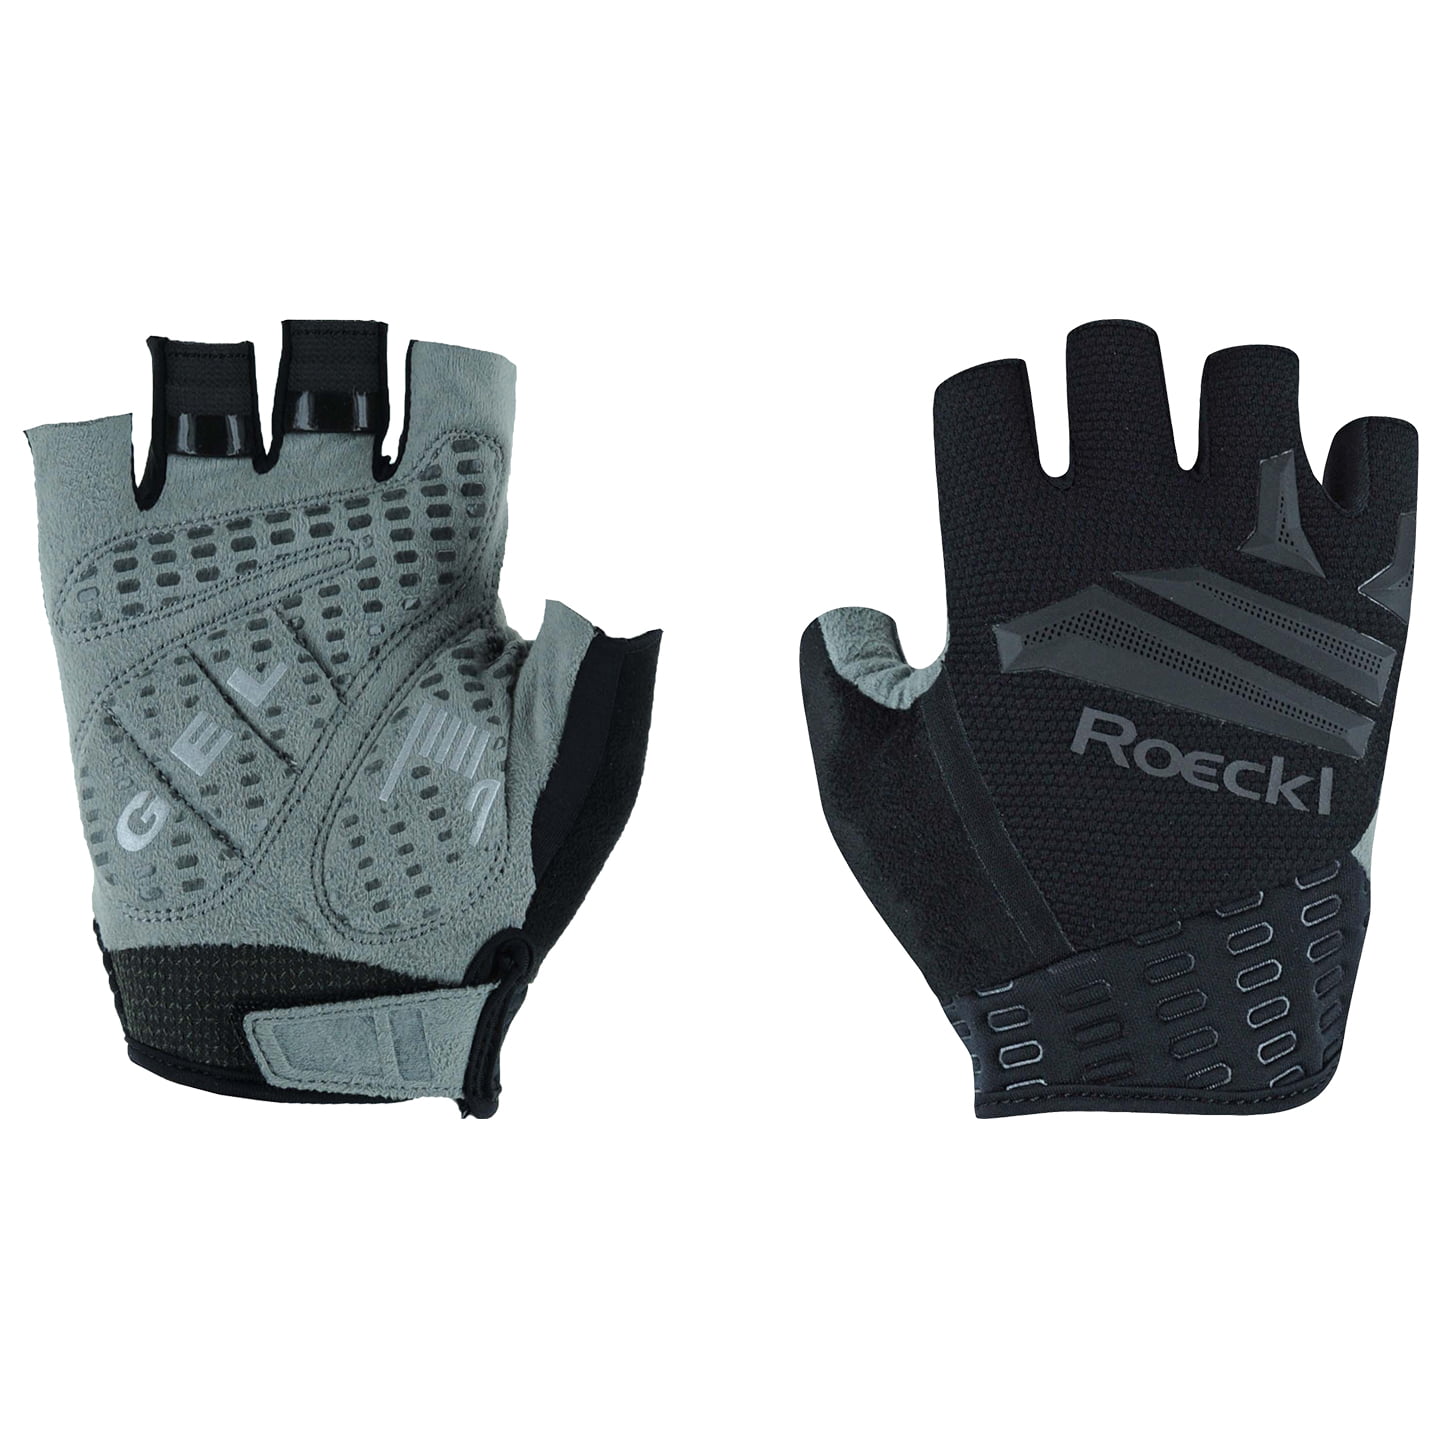 ROECKL Iseler MTB Gloves Cycling Gloves, for men, size 11, Cycle gloves, MTB gear